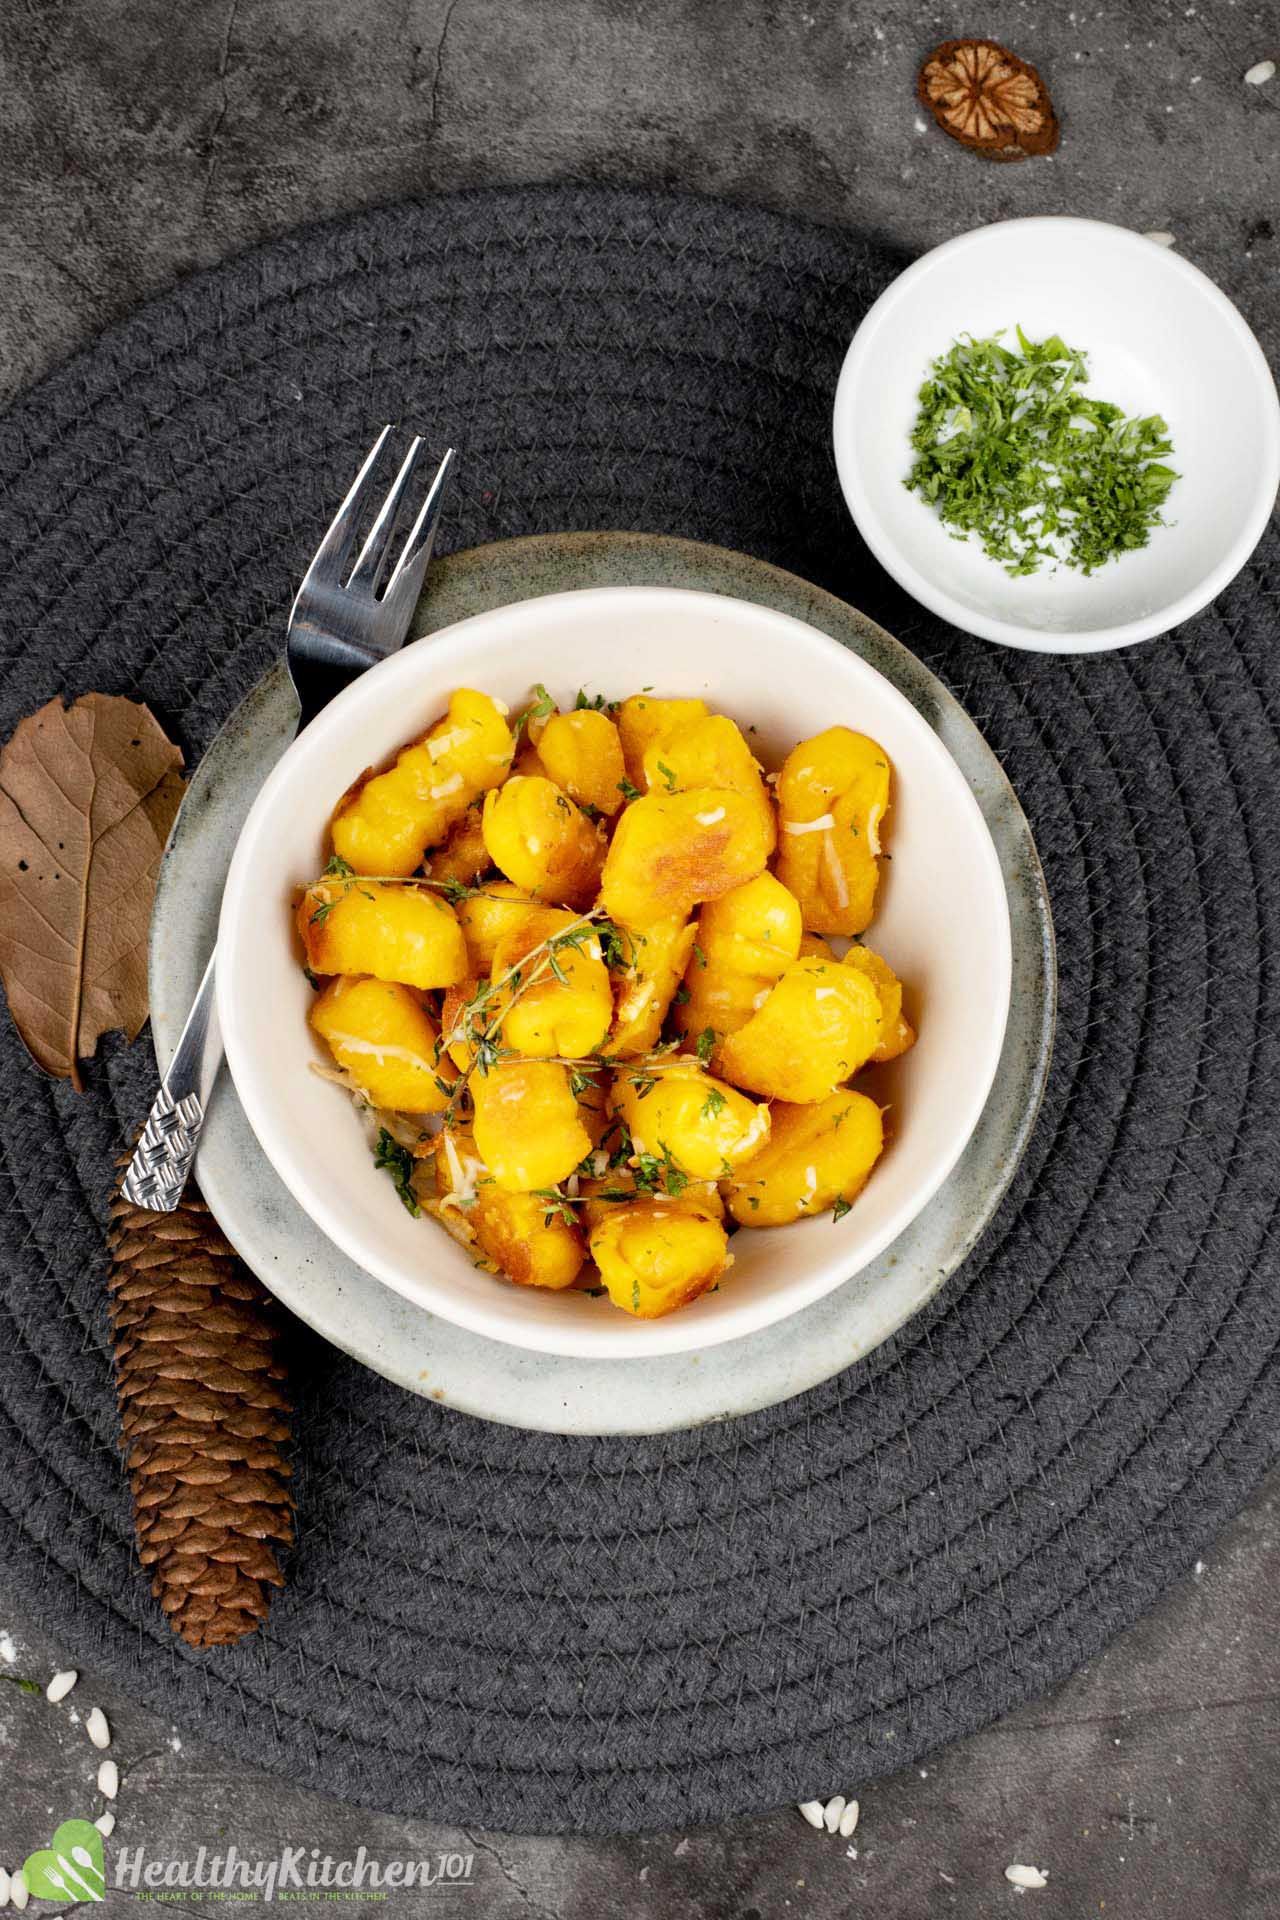 What Goes Well with Gnocchi?